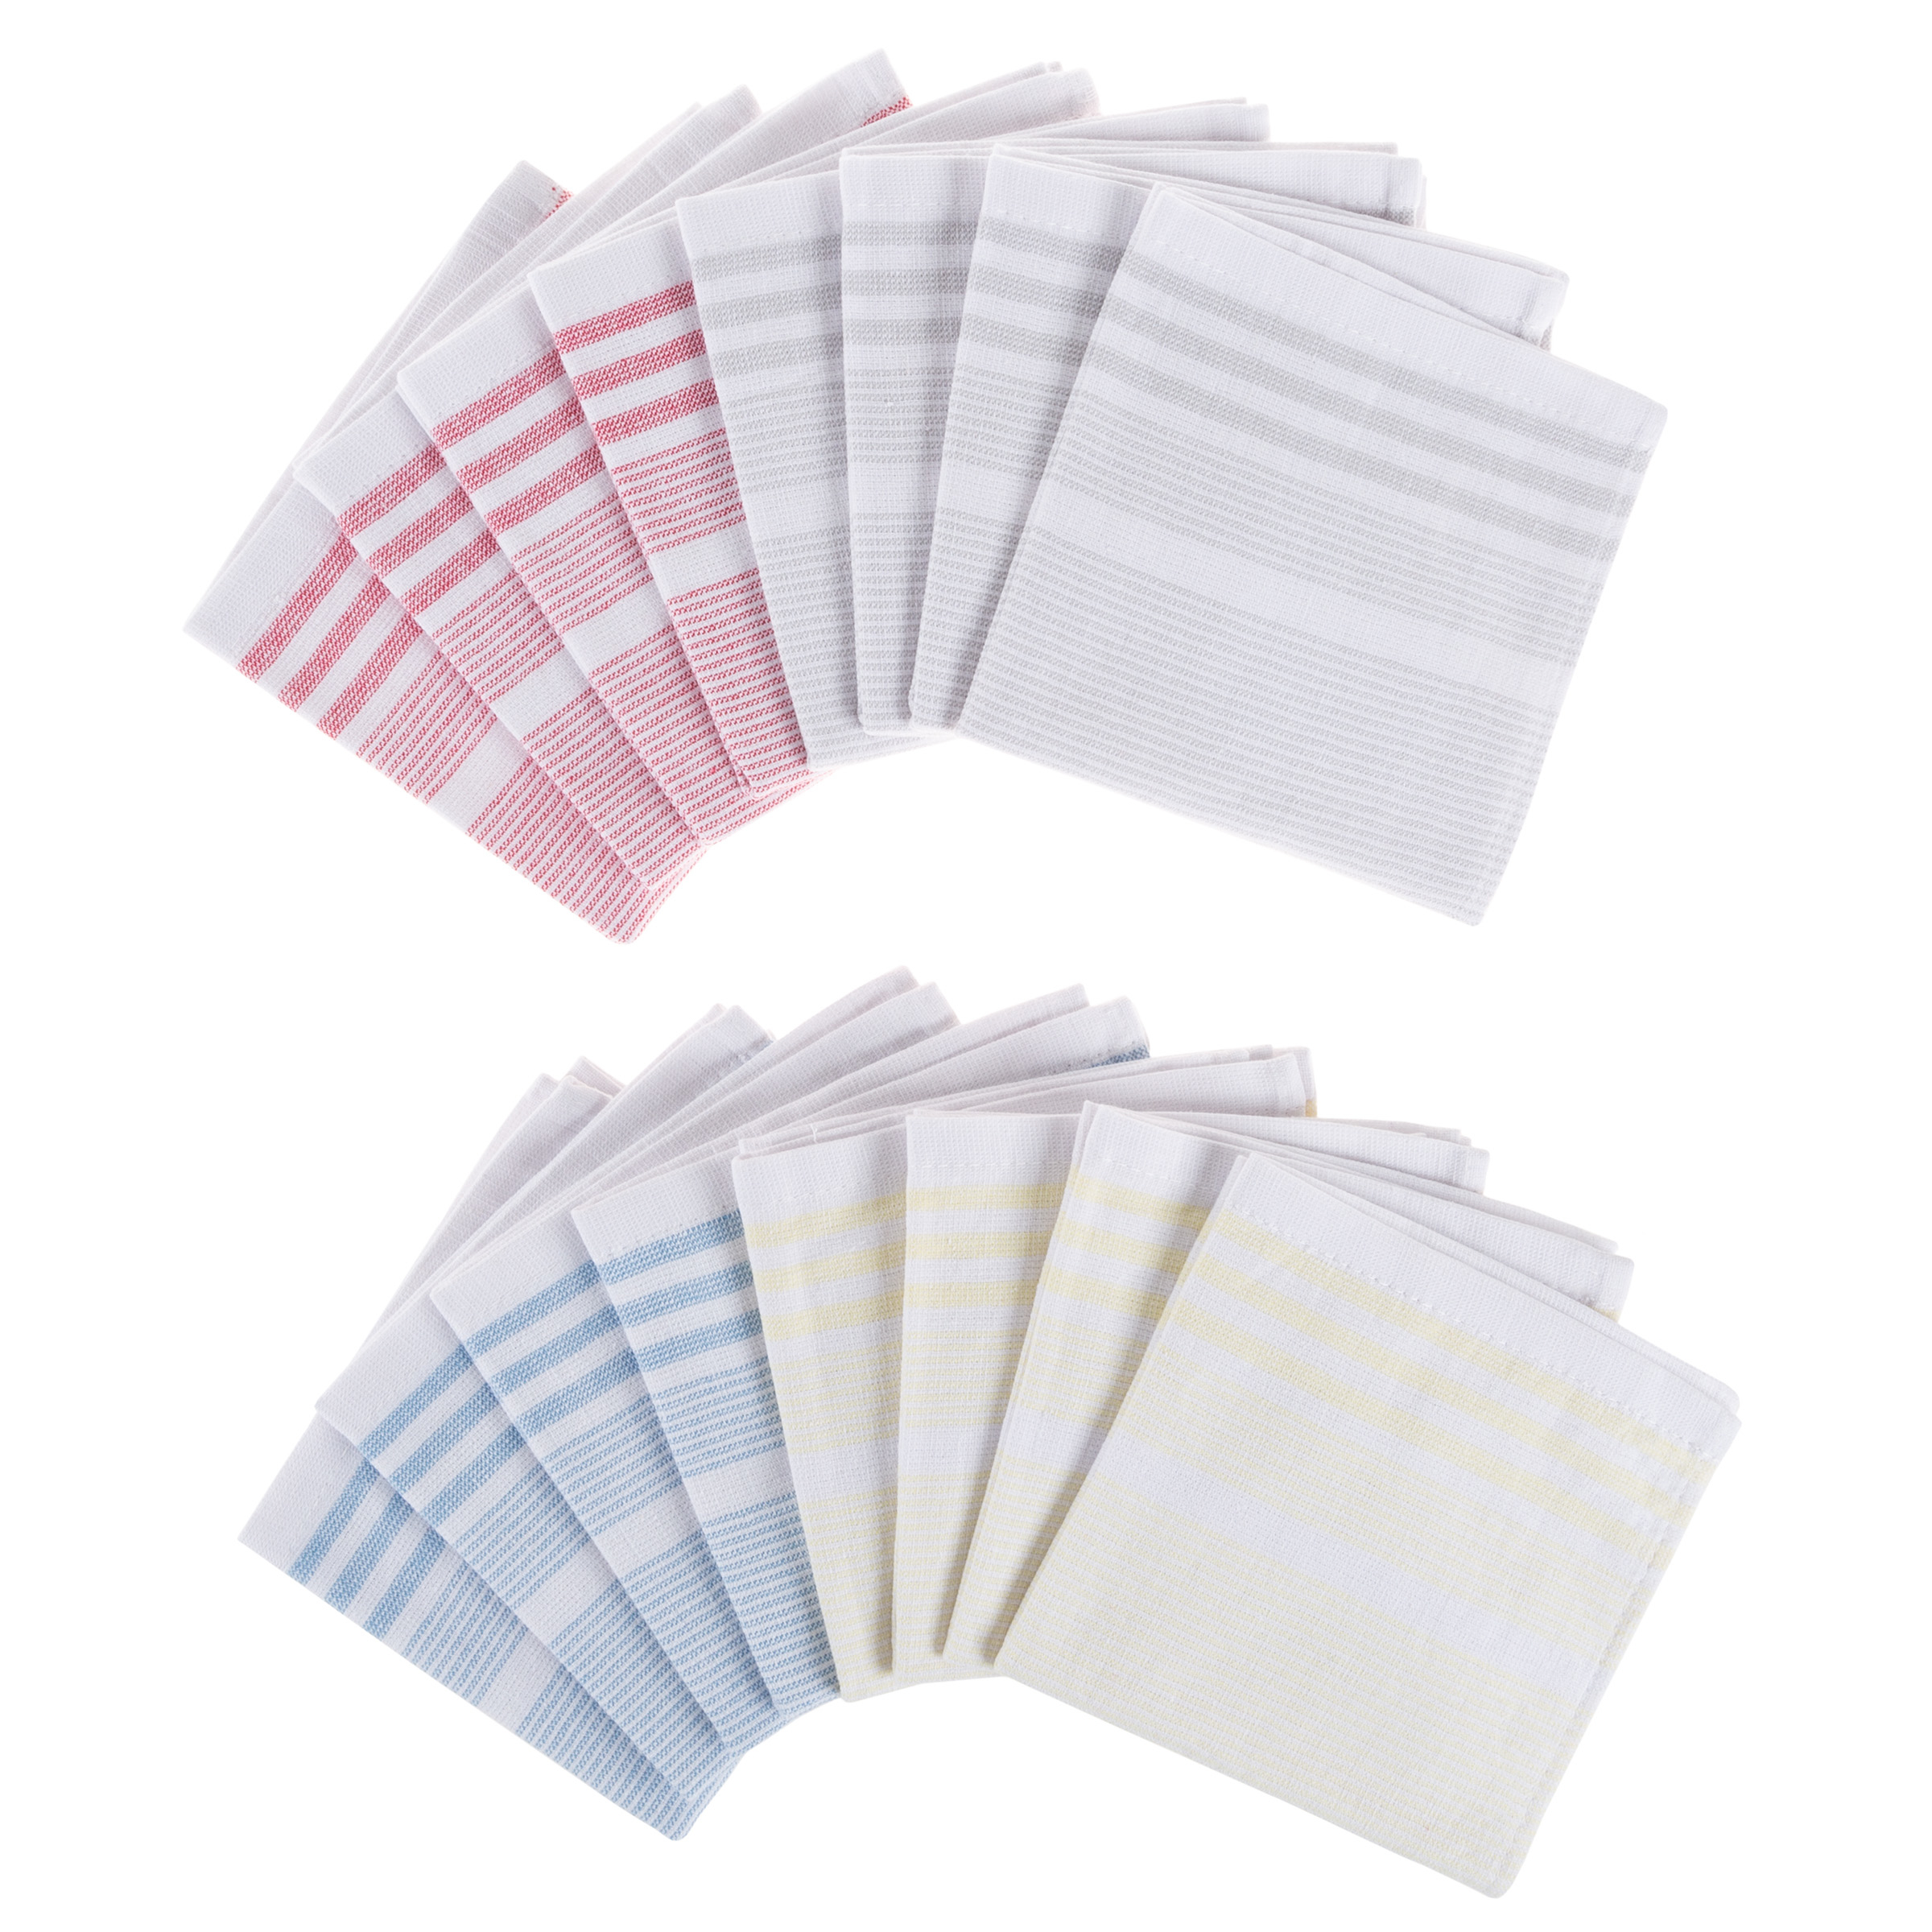 100% Cotton 16 Dish Cloth Or 8 Hand Towel Set Home Decor Matching Kitchen Linens - 16 Pack Dishcloth